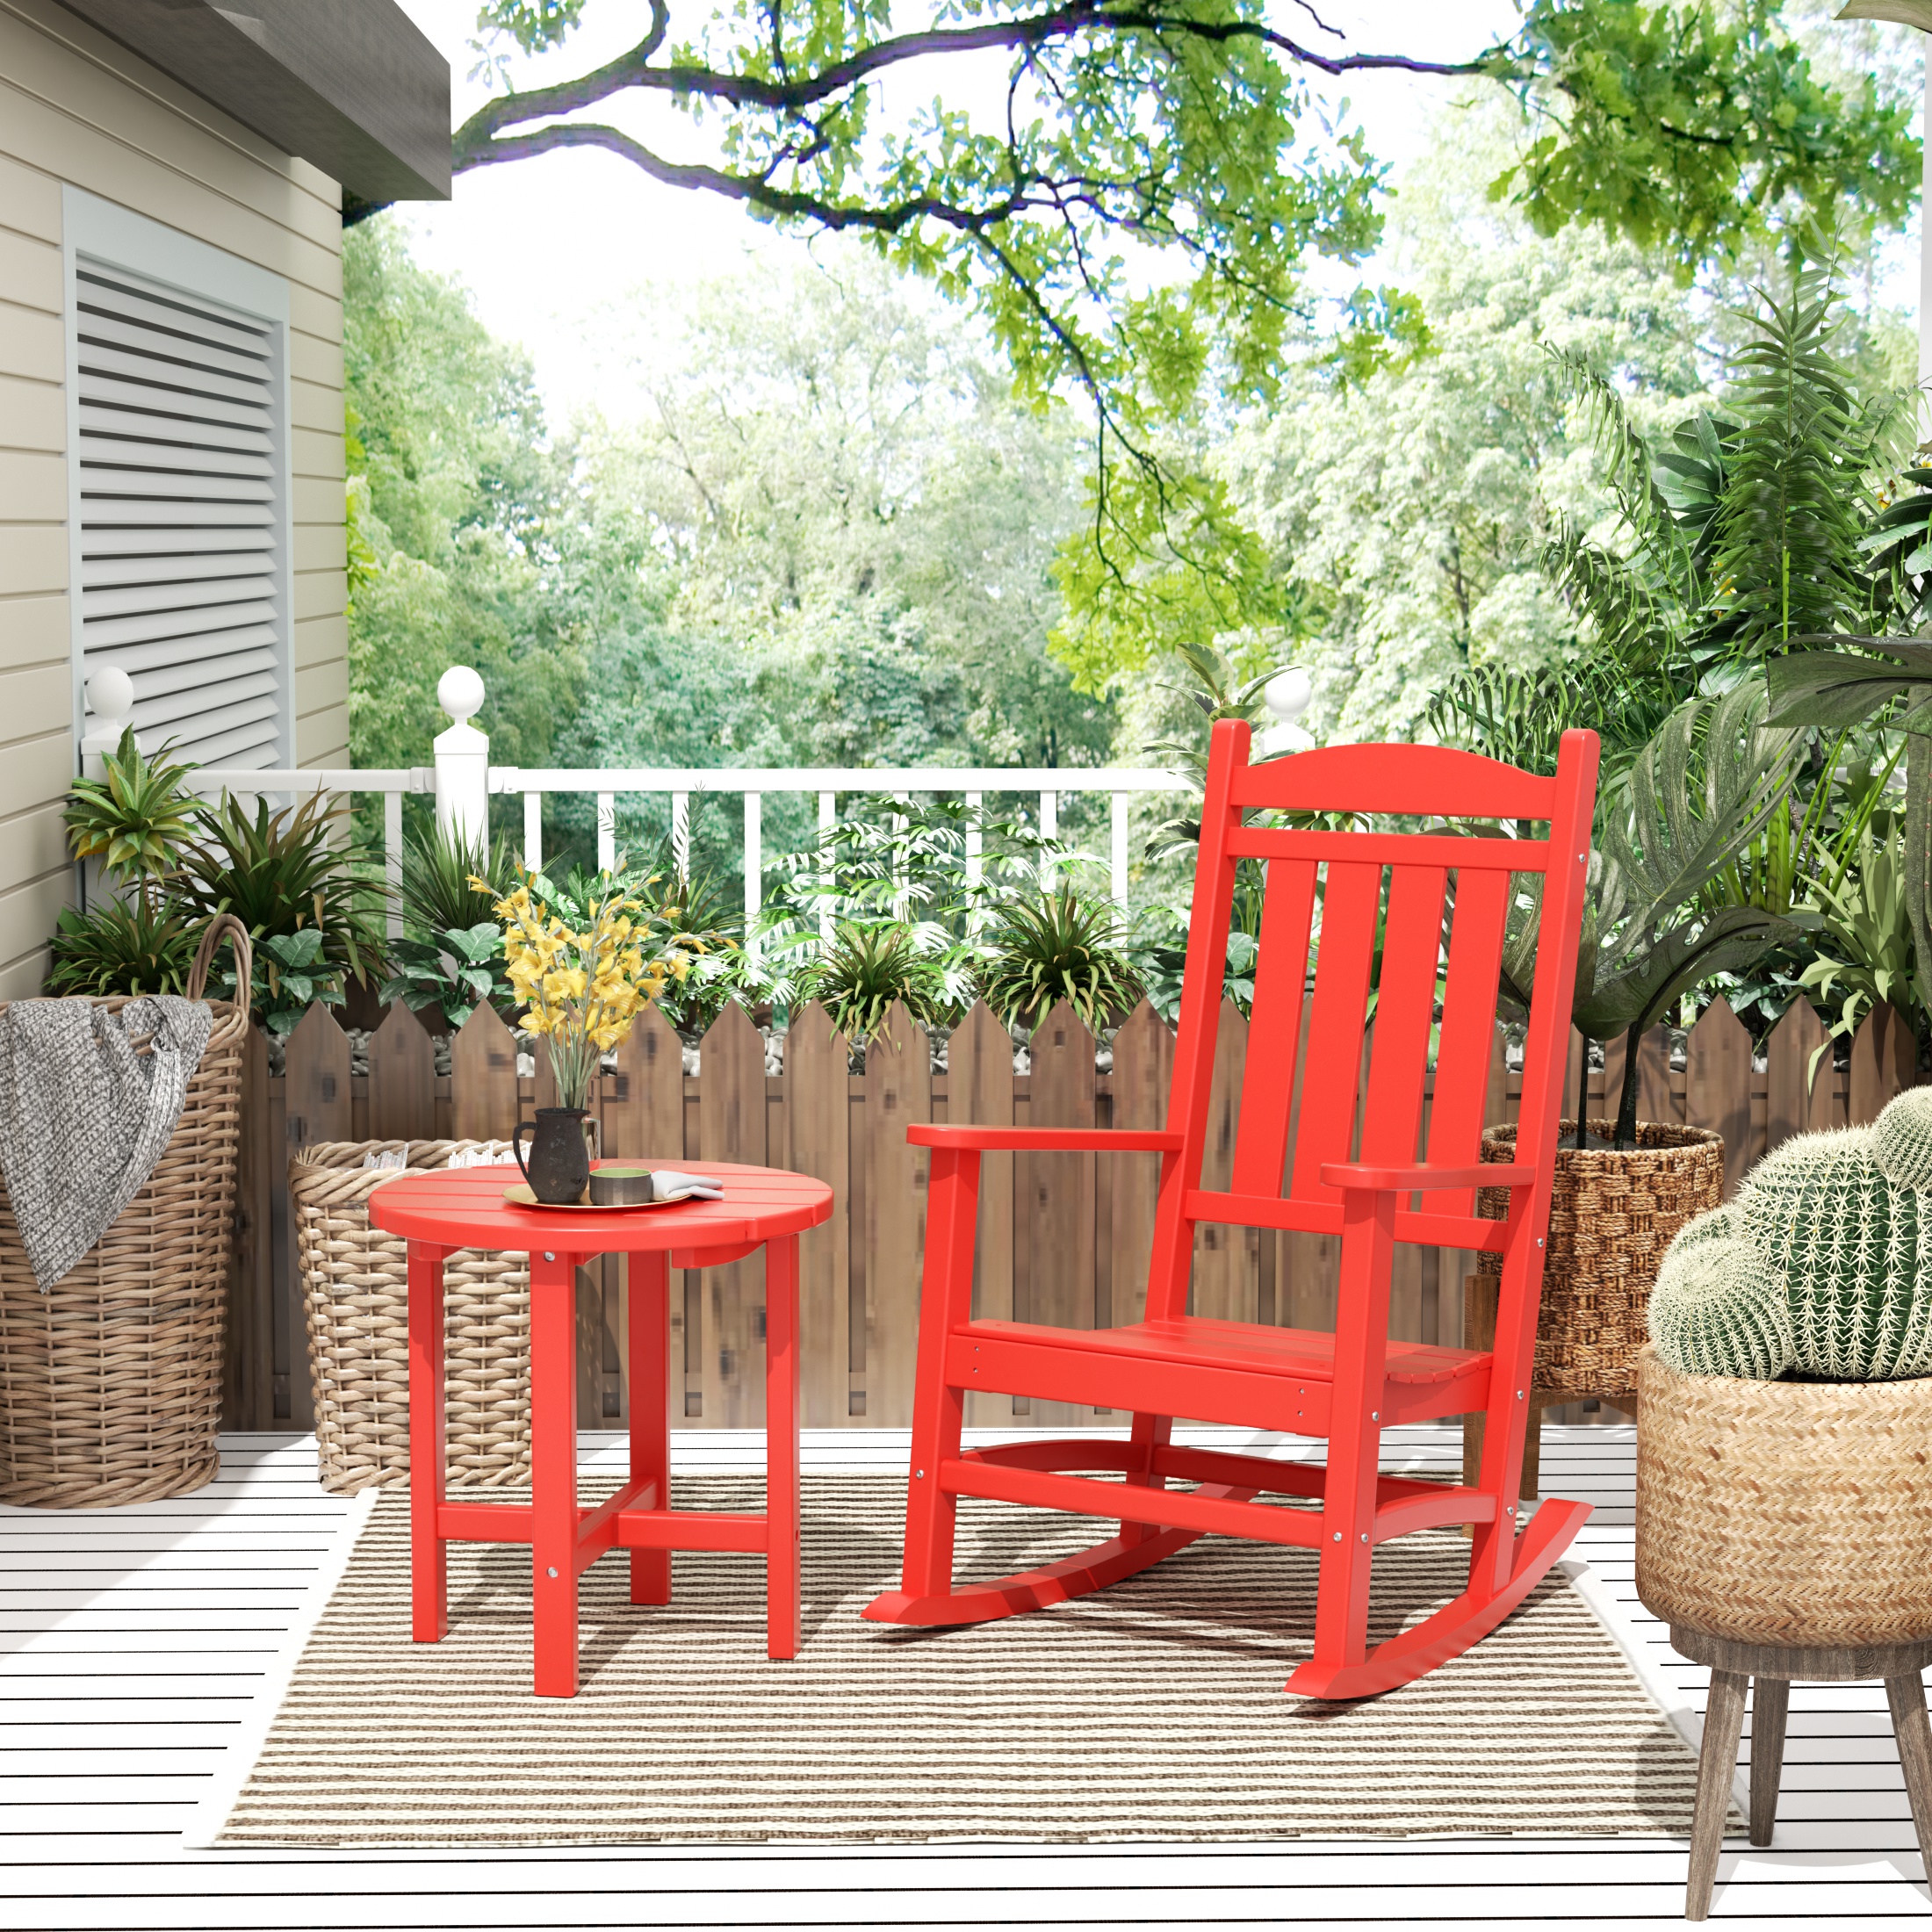 GARDEN 2-Piece Set Classic Plastic Porch Rocking Chair with Round Side Table Included, Red - image 1 of 7